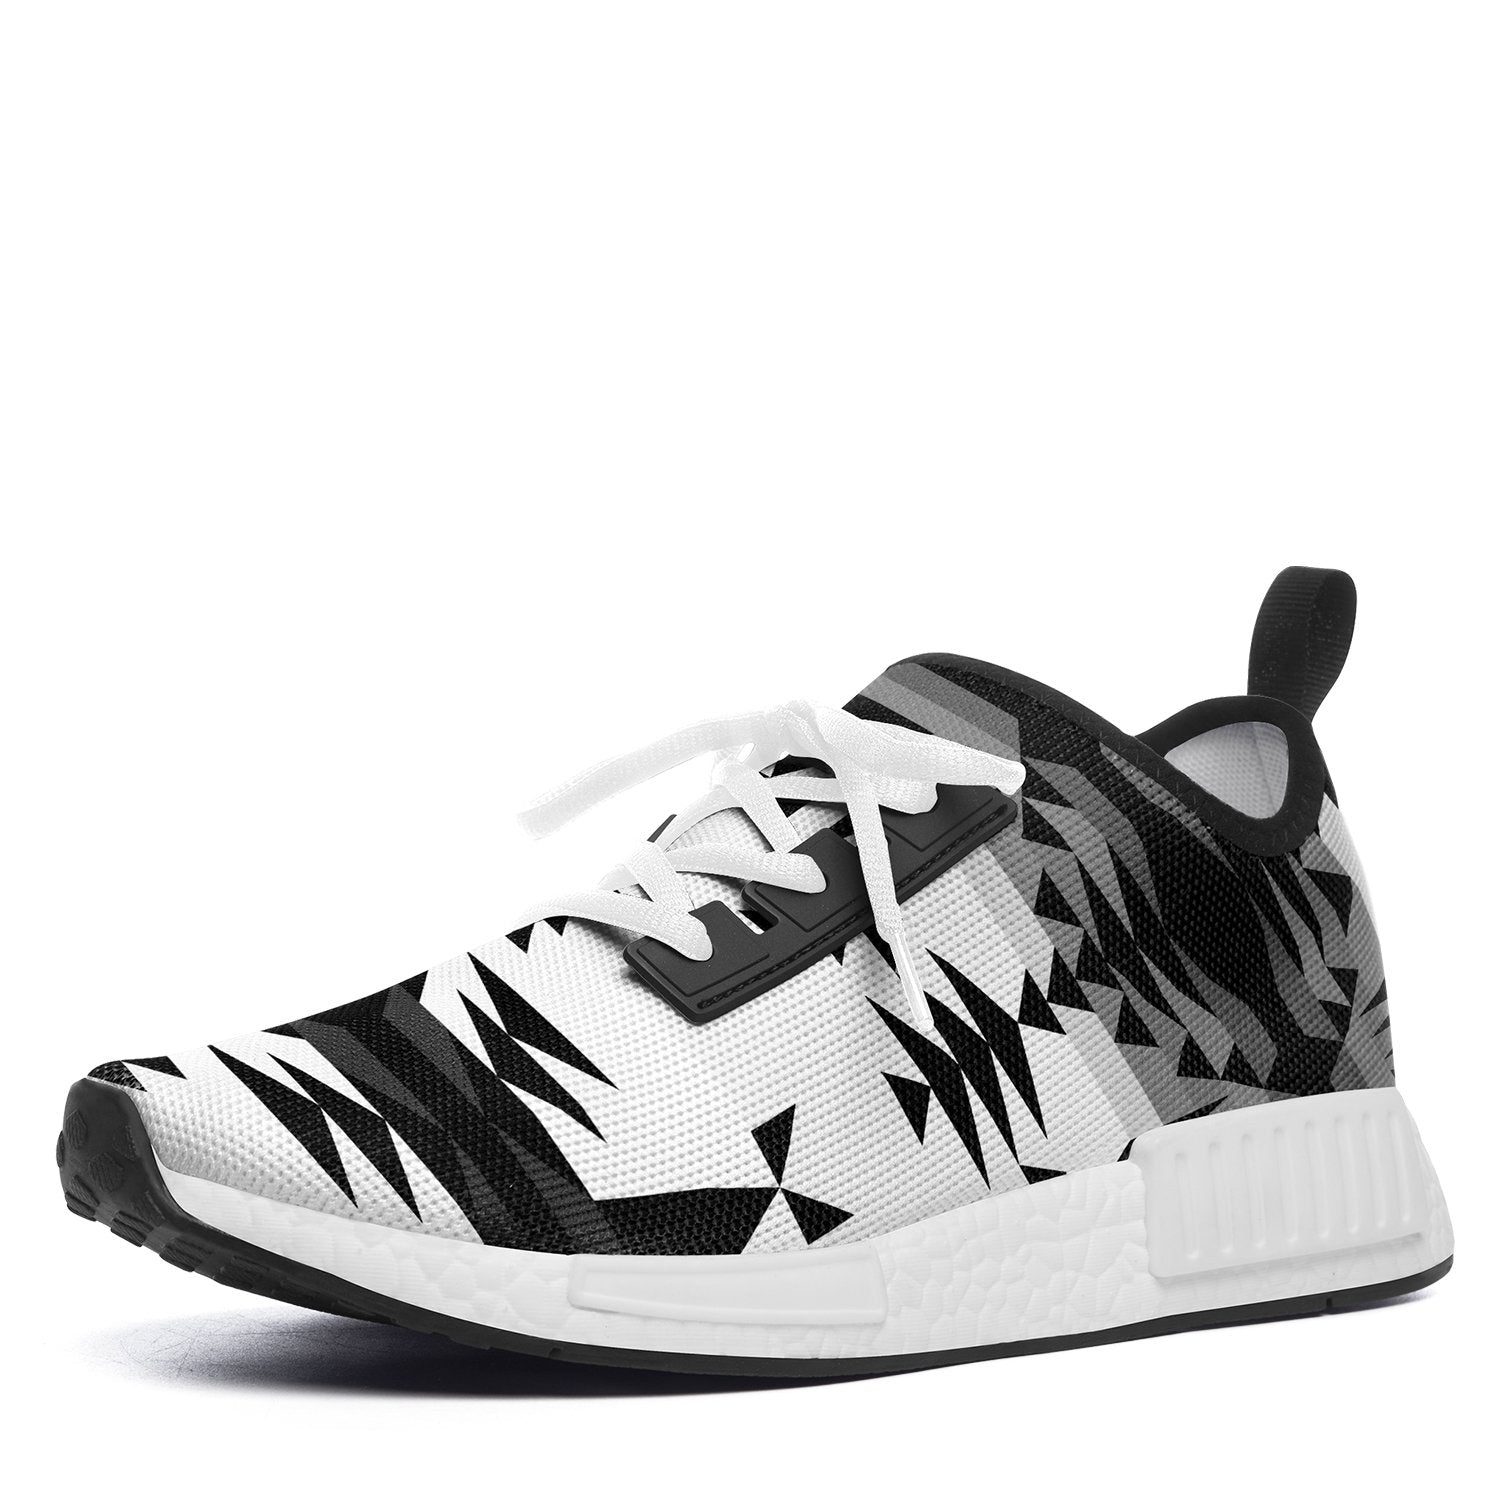 Between the Mountains White and Black Draco Running Shoes 49 Dzine 